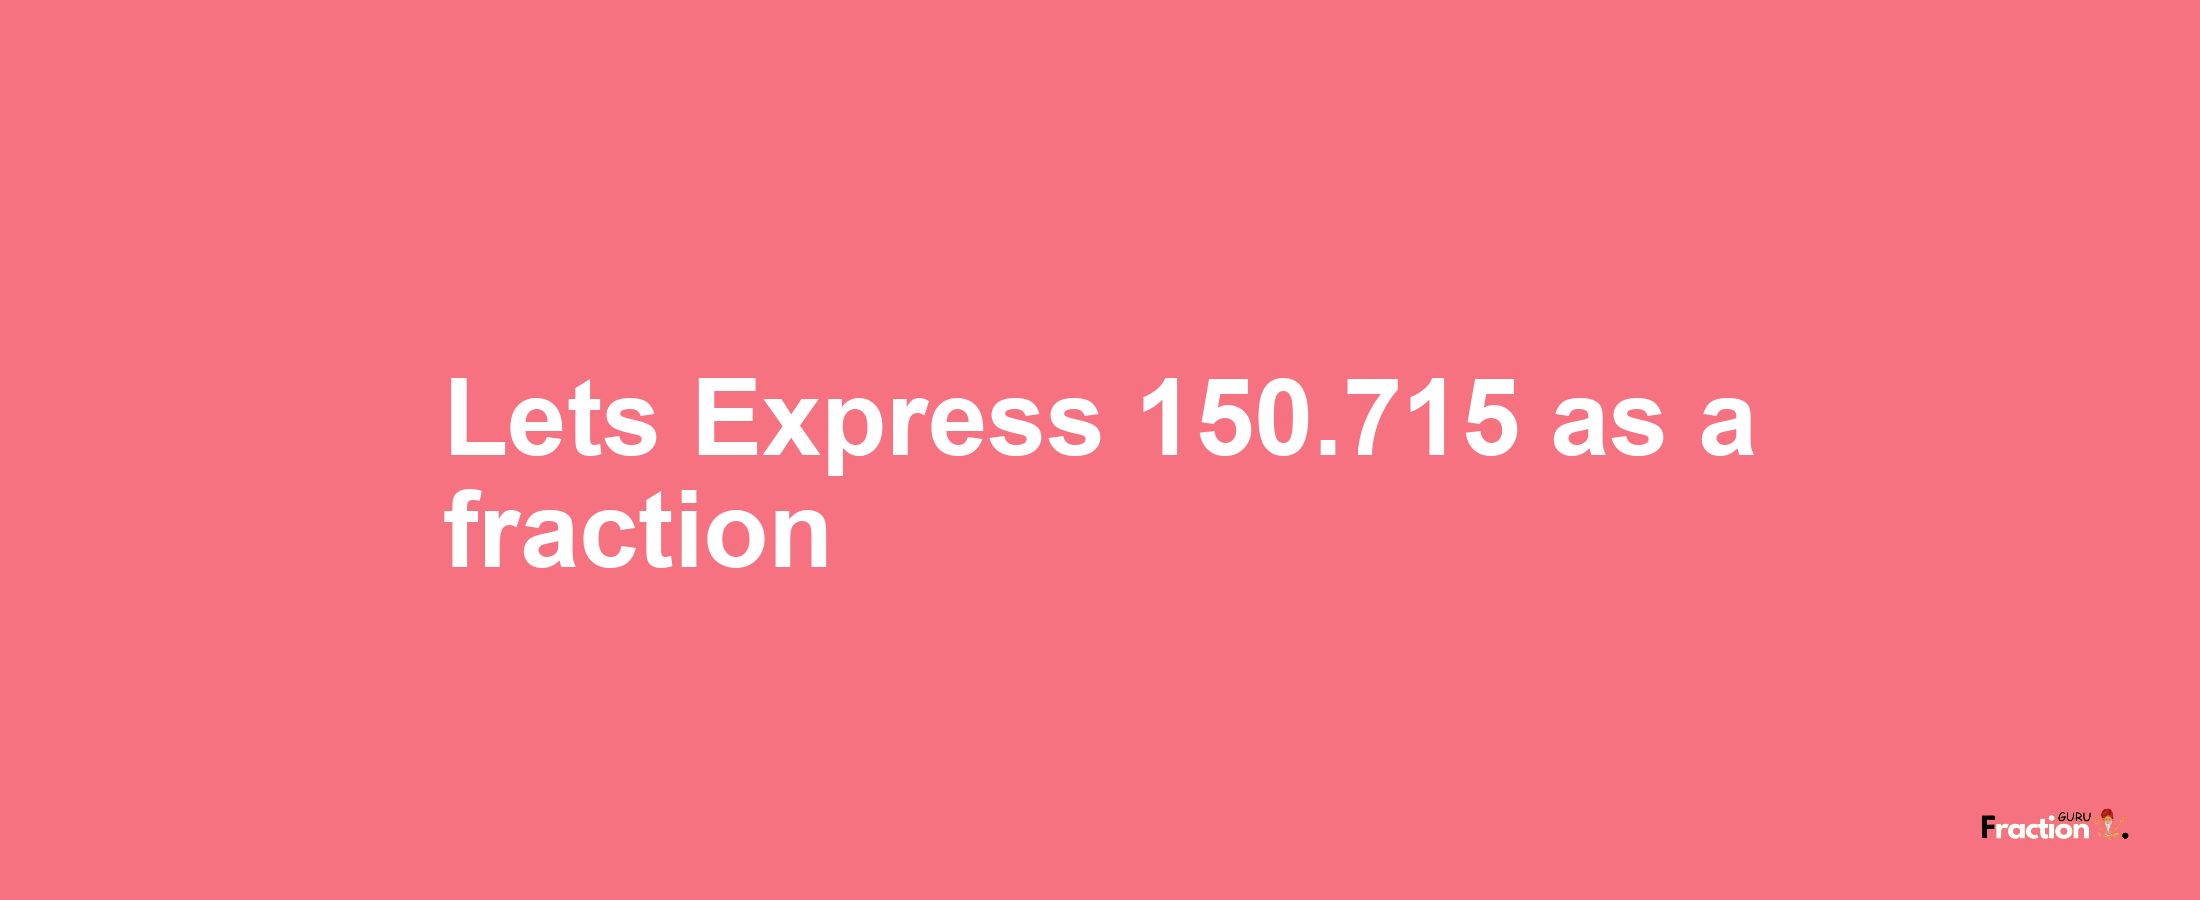 Lets Express 150.715 as afraction